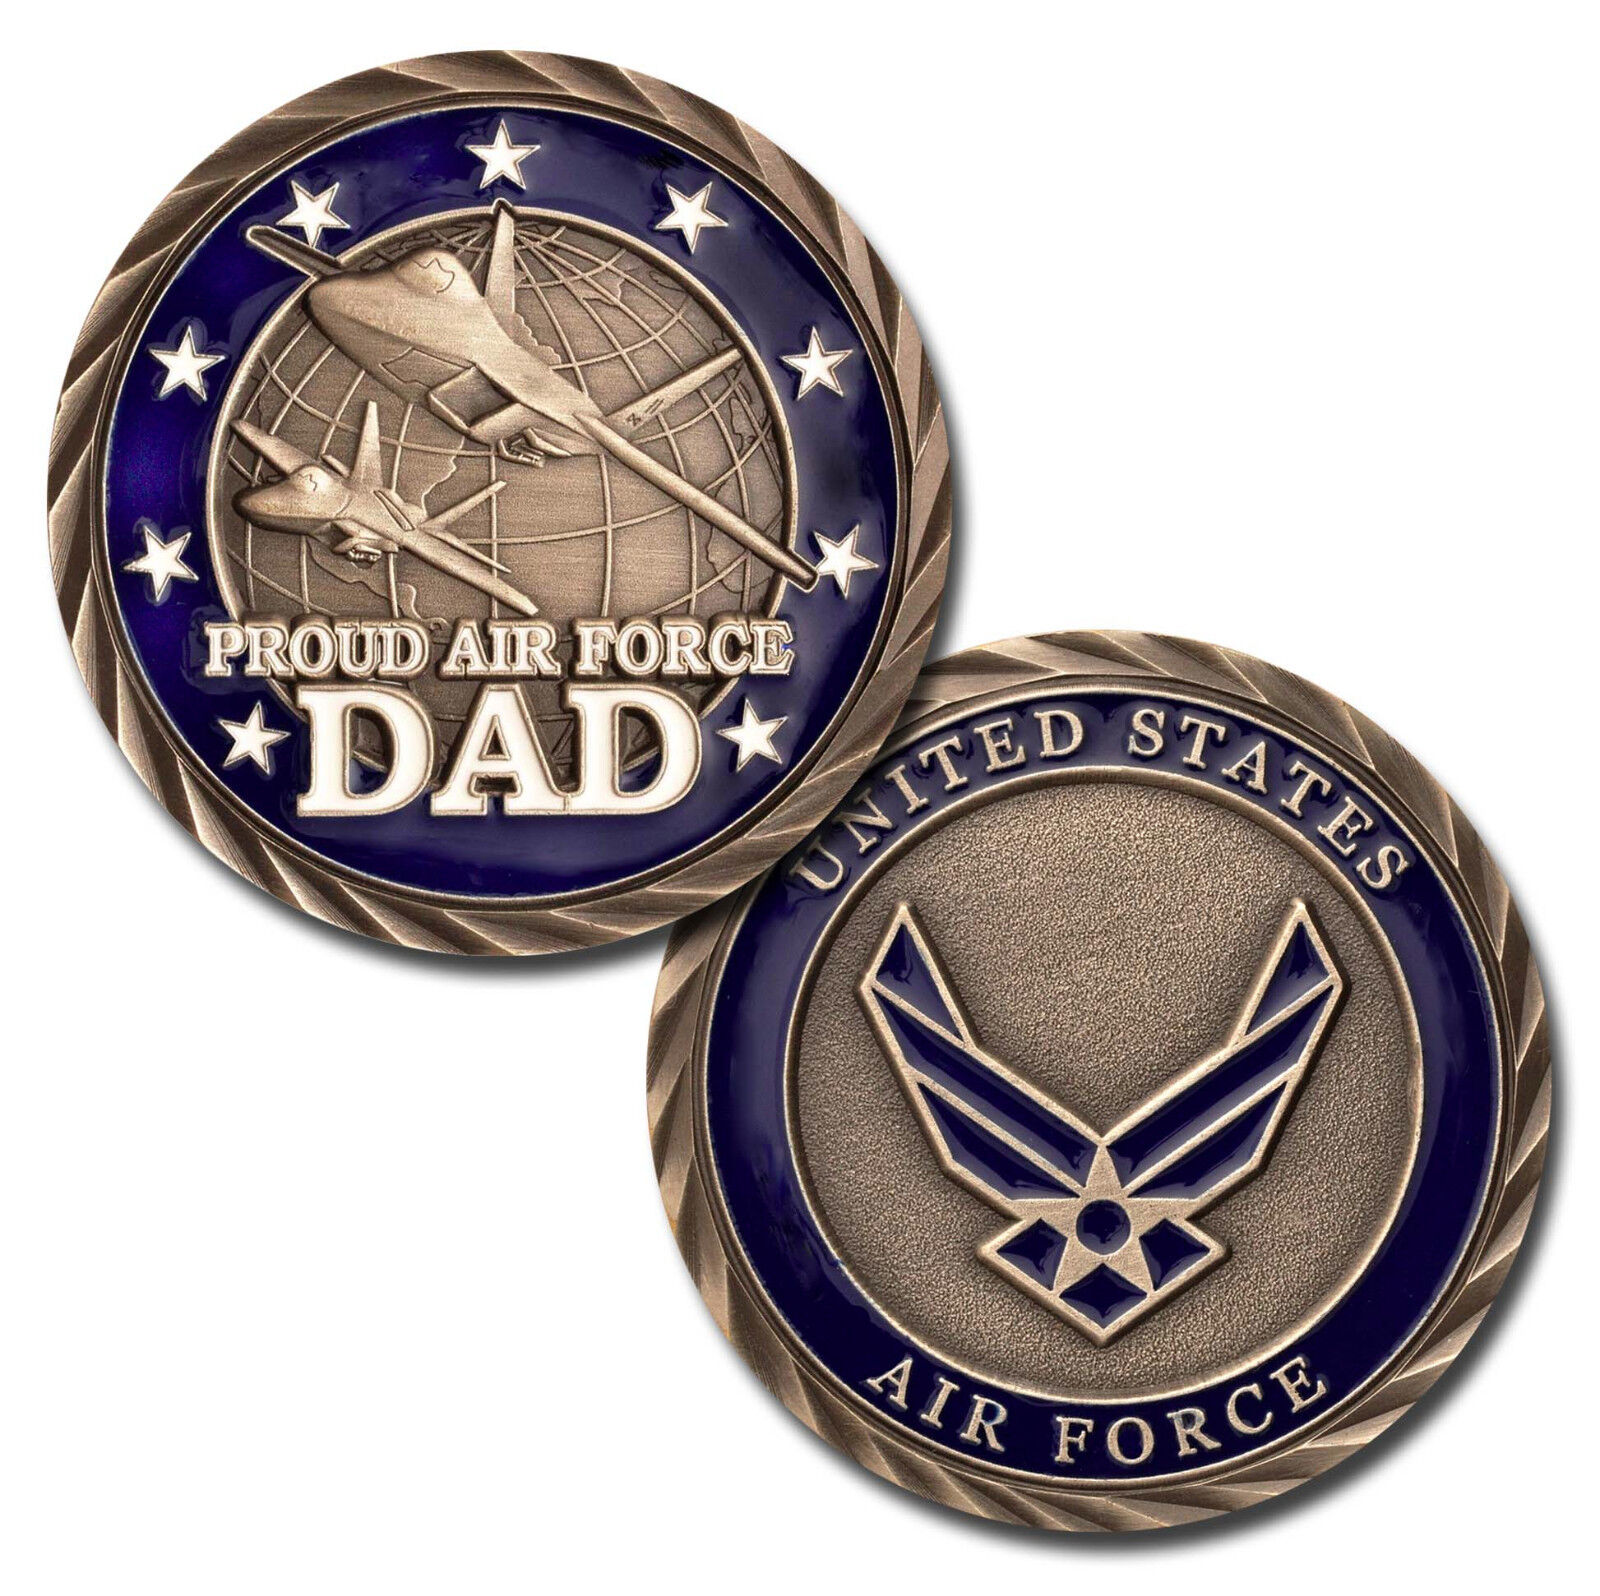 NEW USAF U.S. Air Force Proud Air Force Dad Challenge Coin.